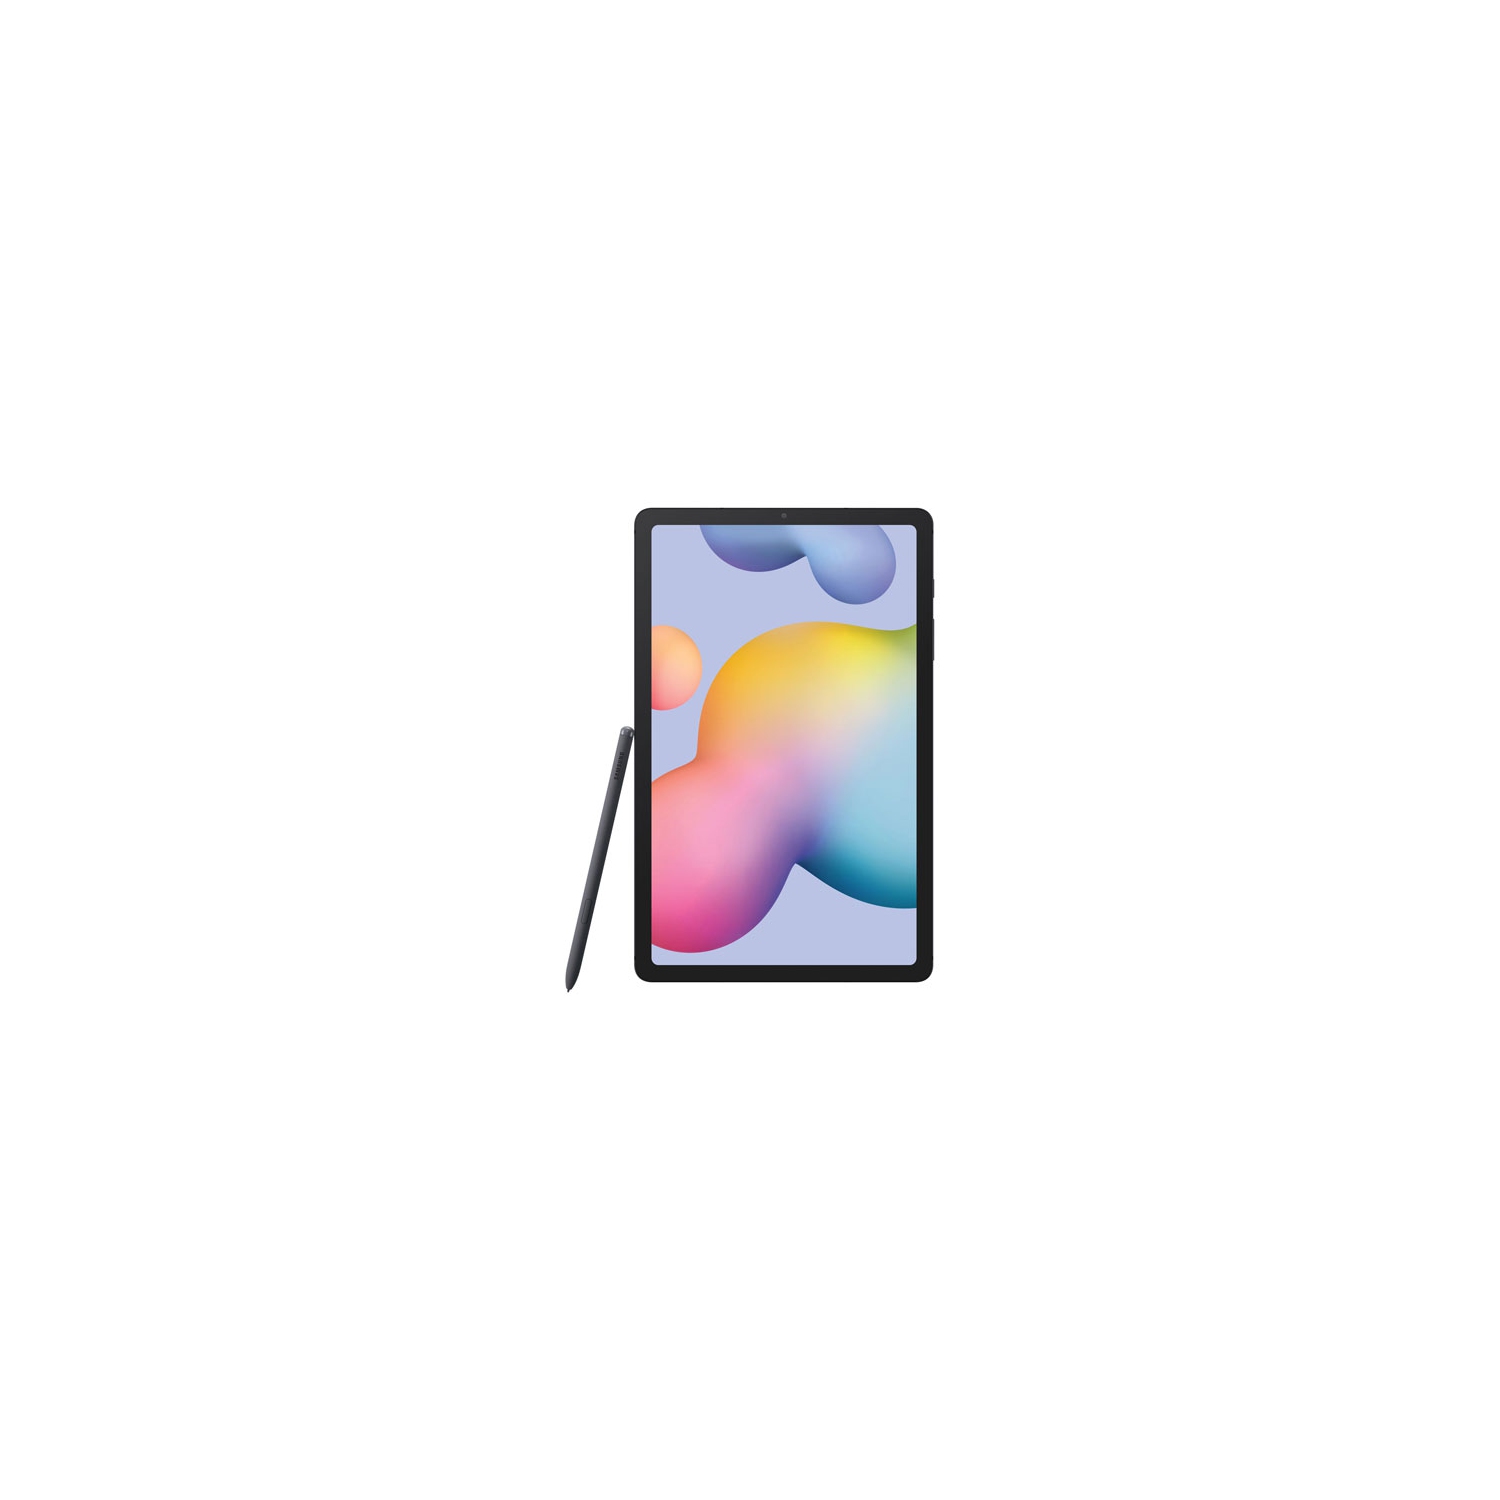 Refurbished (Fair) - Samsung Galaxy Tab S6 Lite 10.4" 64GB Android Tablet with Exynos 9611 8-Core Processor - Oxford Grey